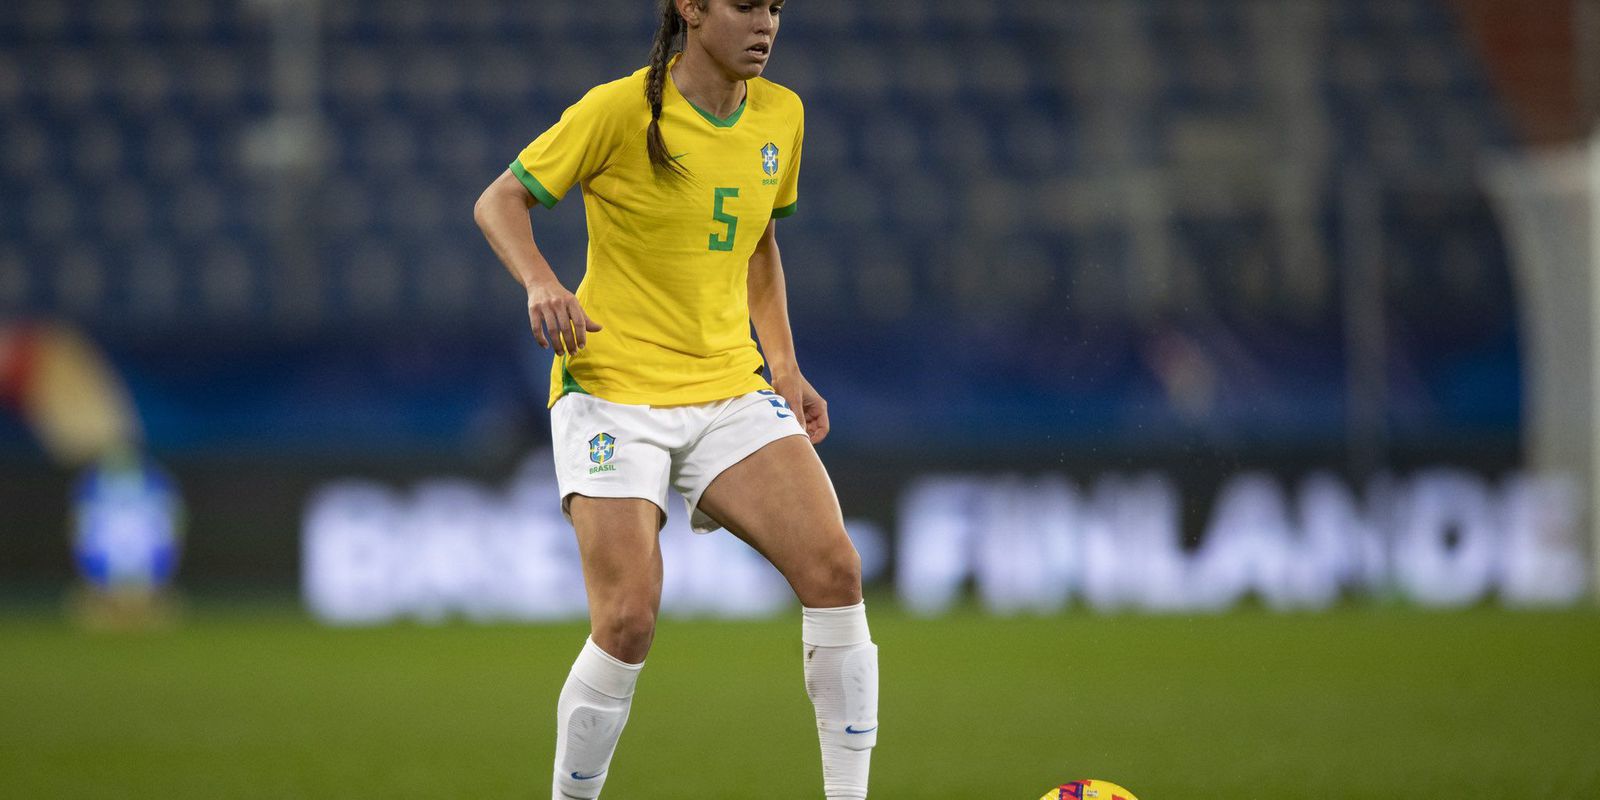 Women's team: Luana feels operated on knee and gives way to Ana Vitória